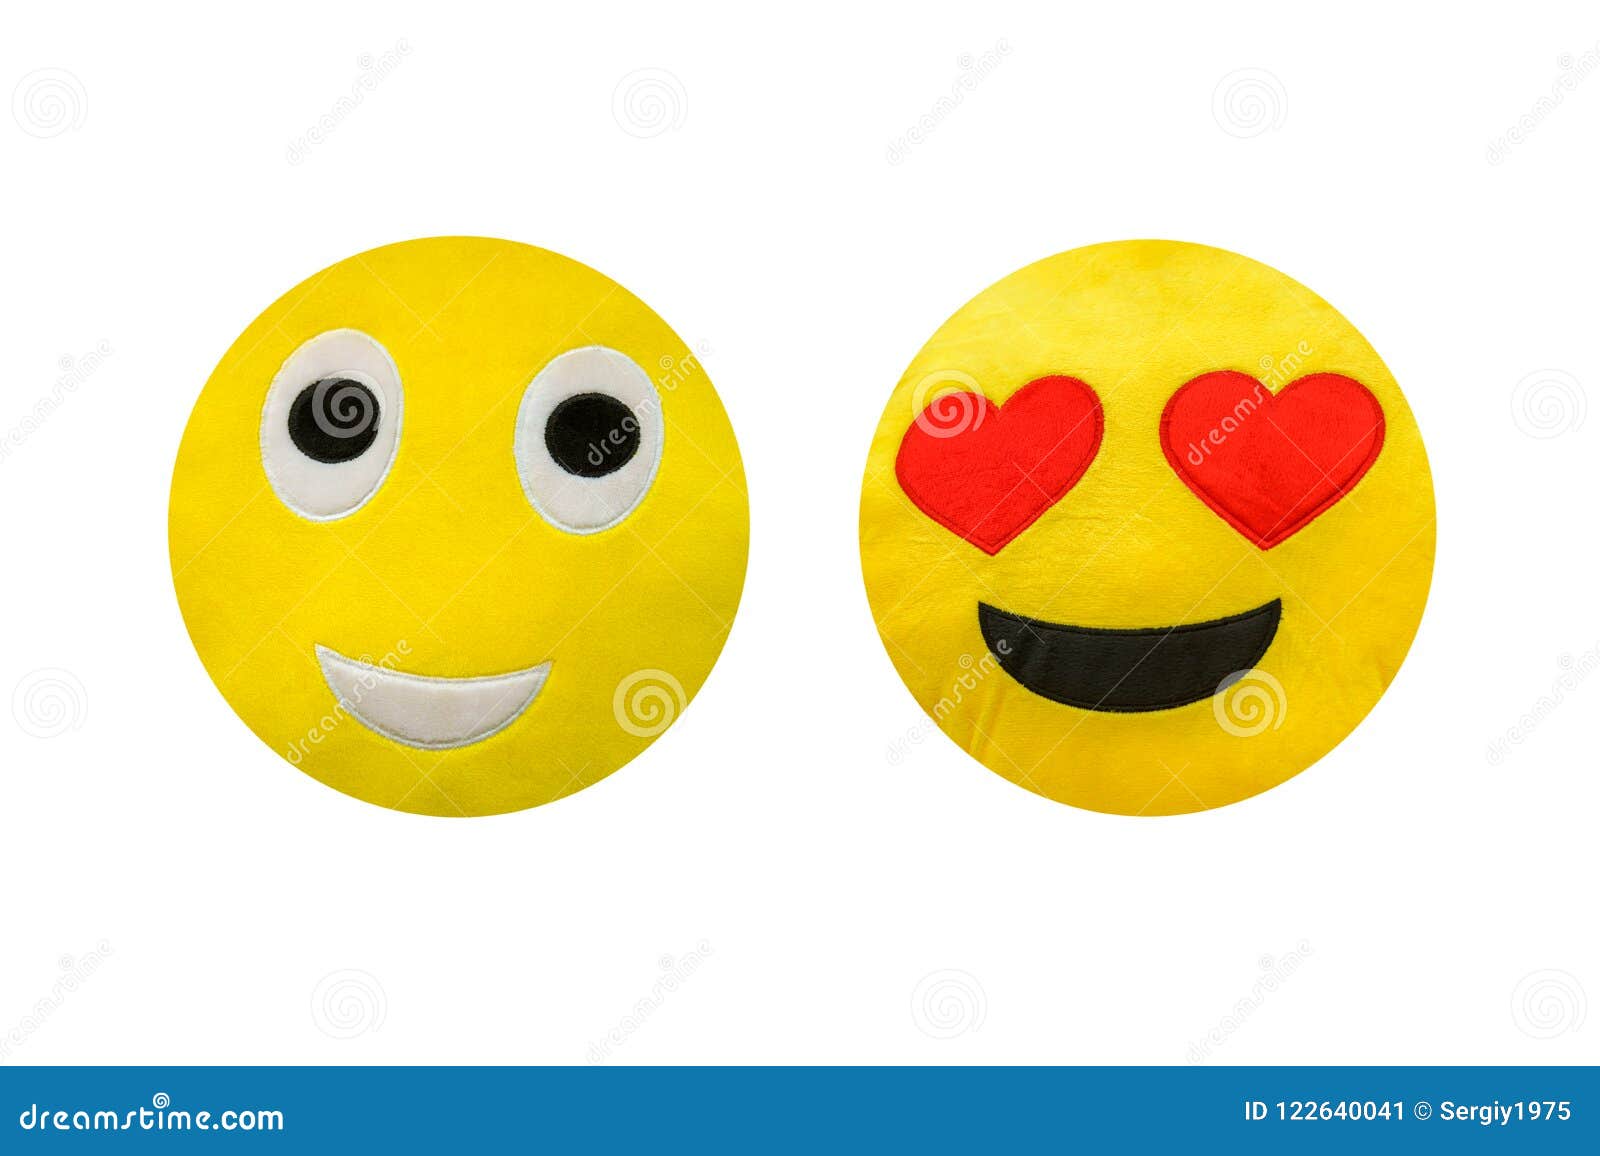 Funny Love Smiley Isolated on White Background Stock Image - Image ...